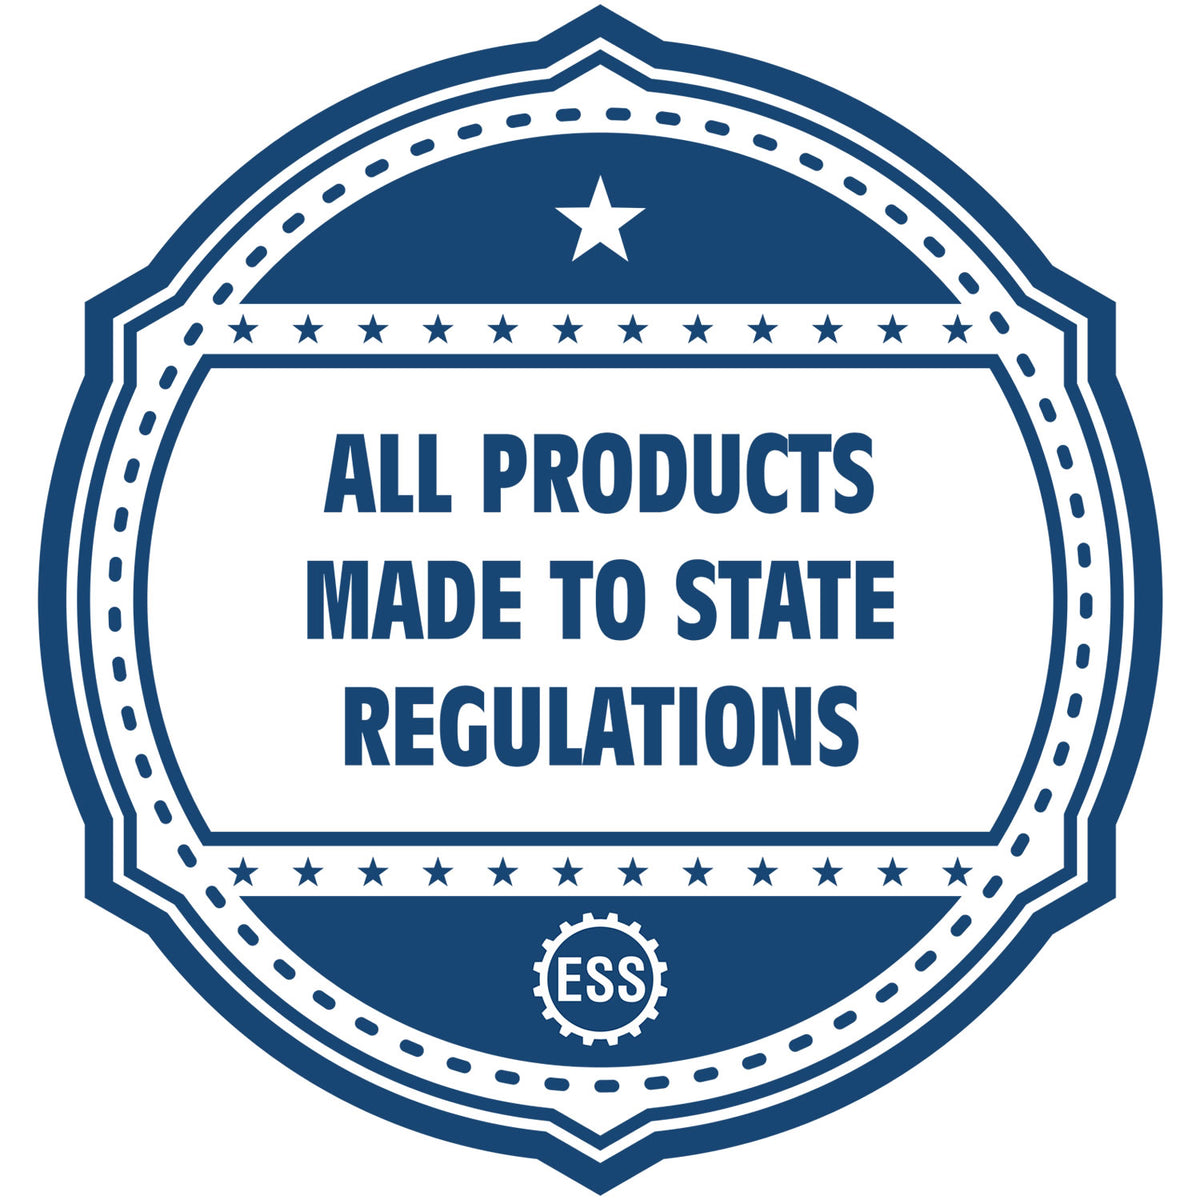 An icon or badge element for the North Dakota Desk Architect Embossing Seal showing that this product is made in compliance with state regulations.